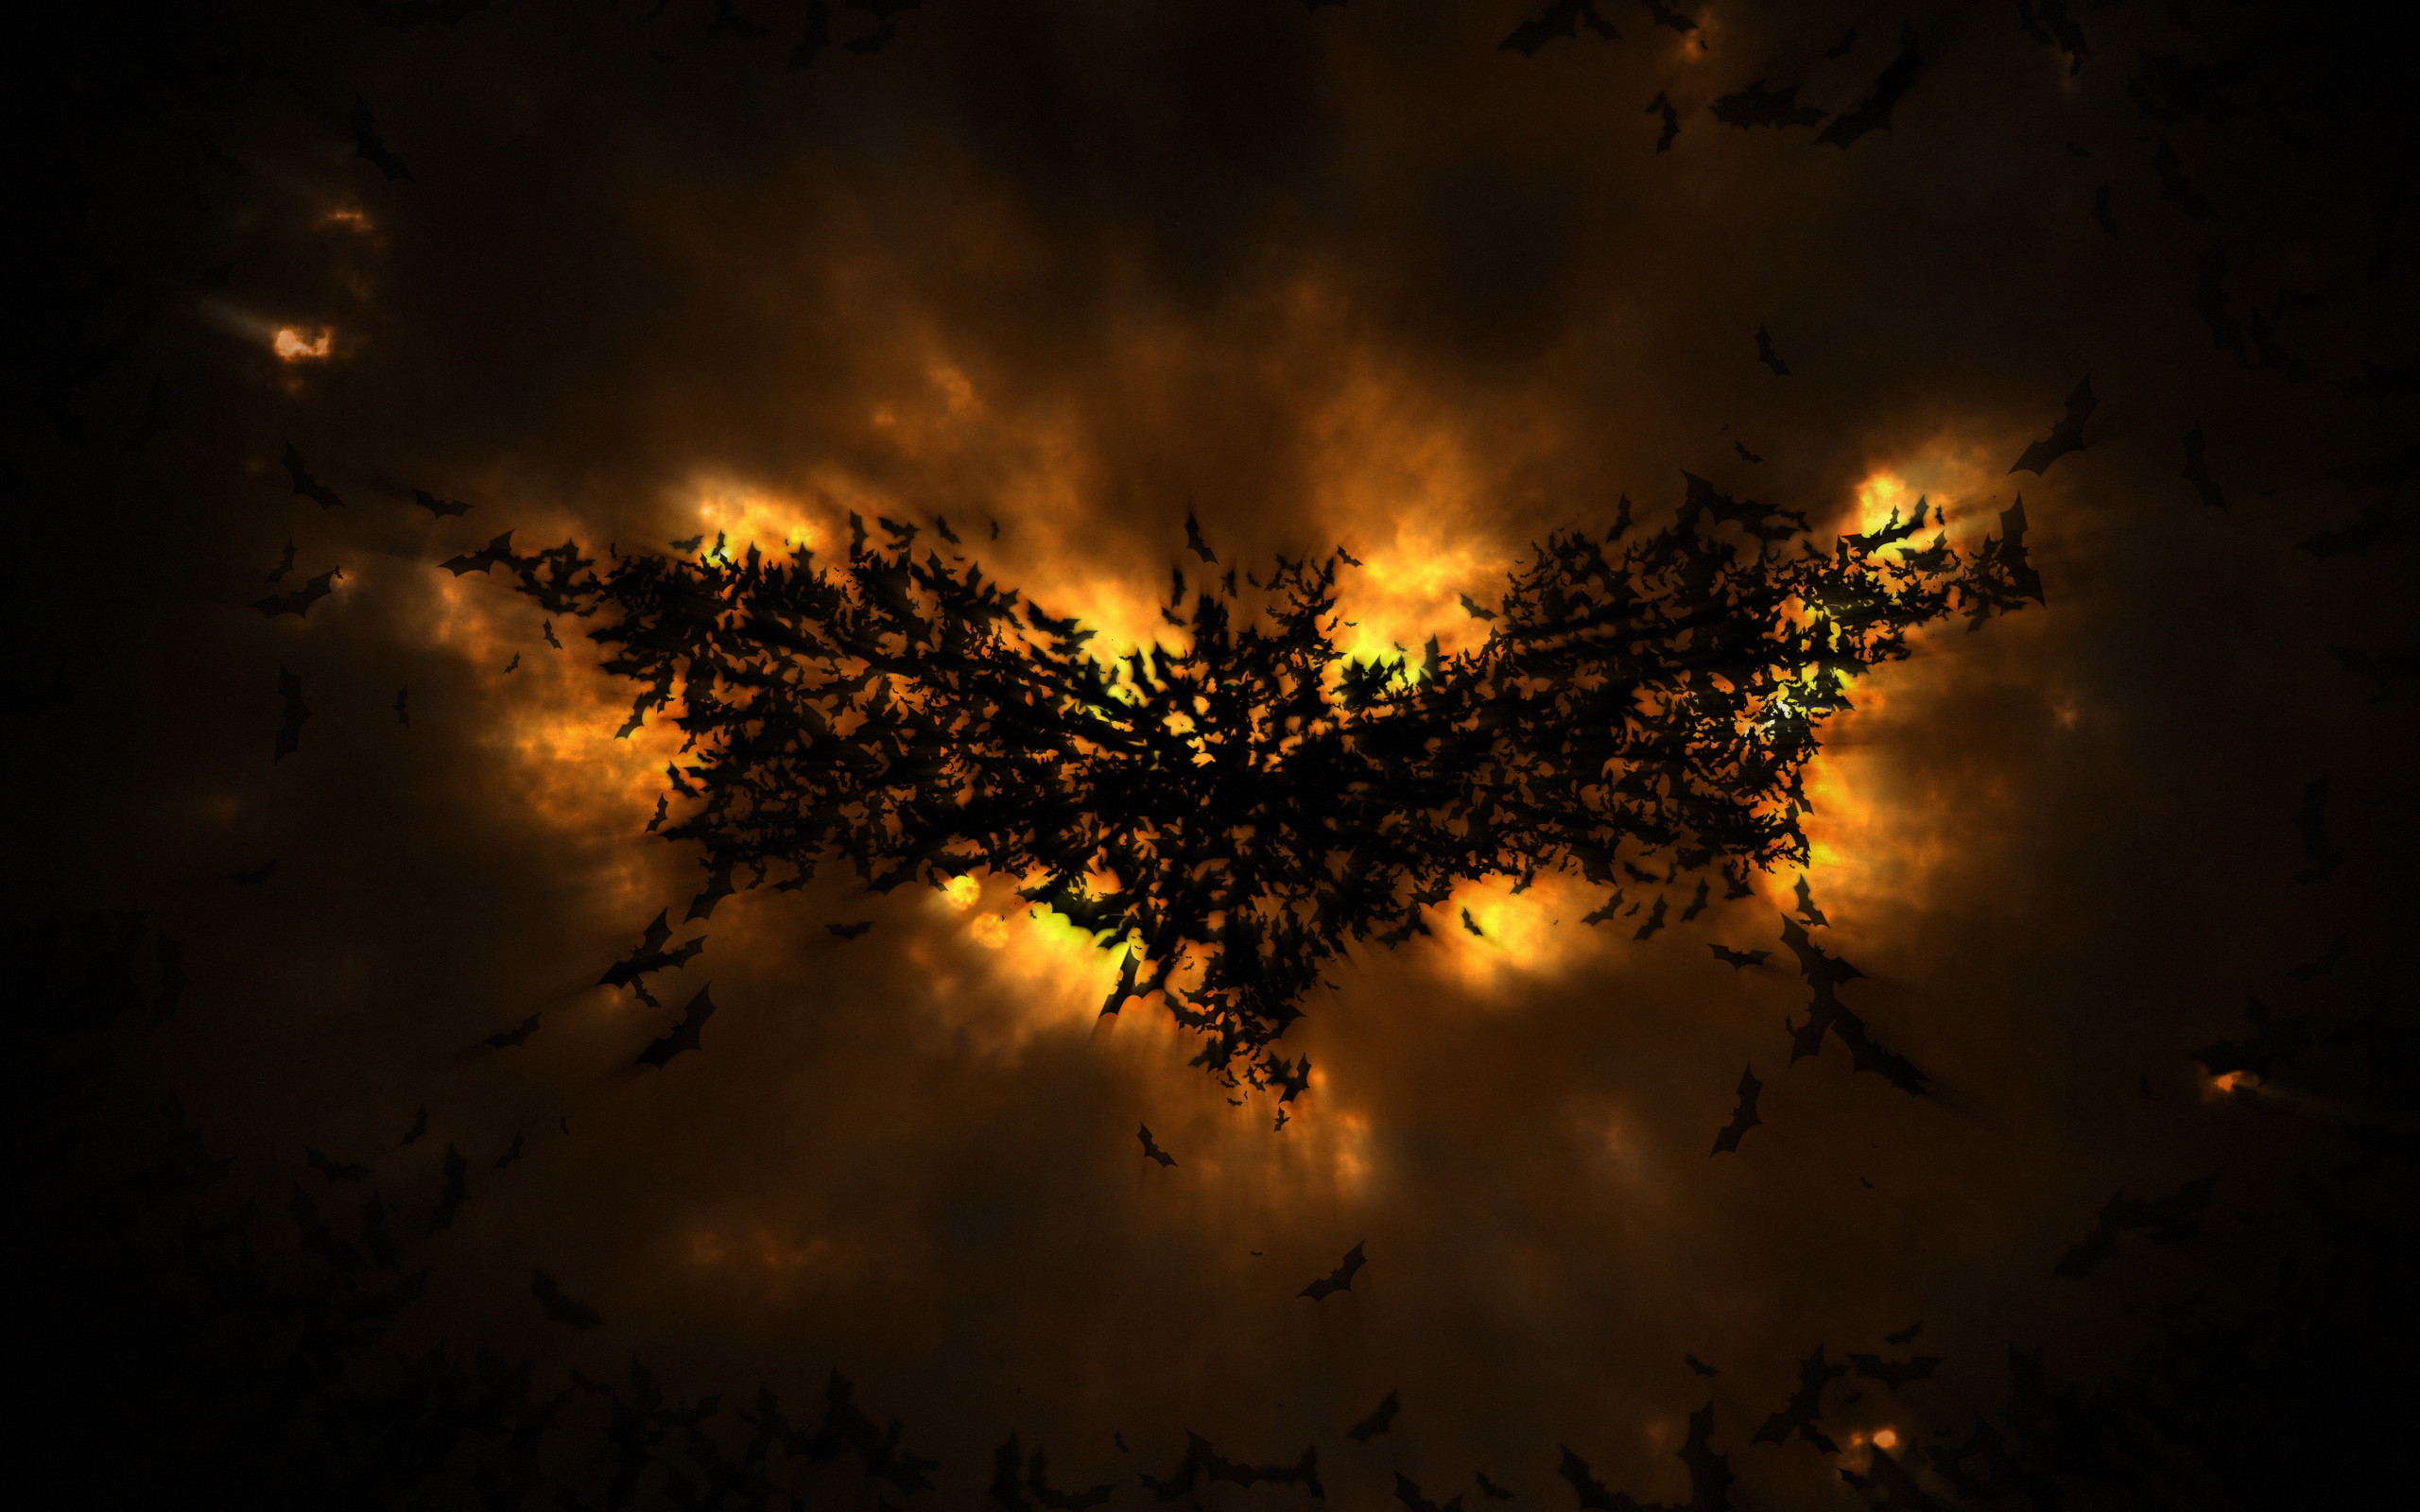 Published 25.07.2012 at 2560 1600 in The Dark Knight Rises Batman Logo abstract wallpaper